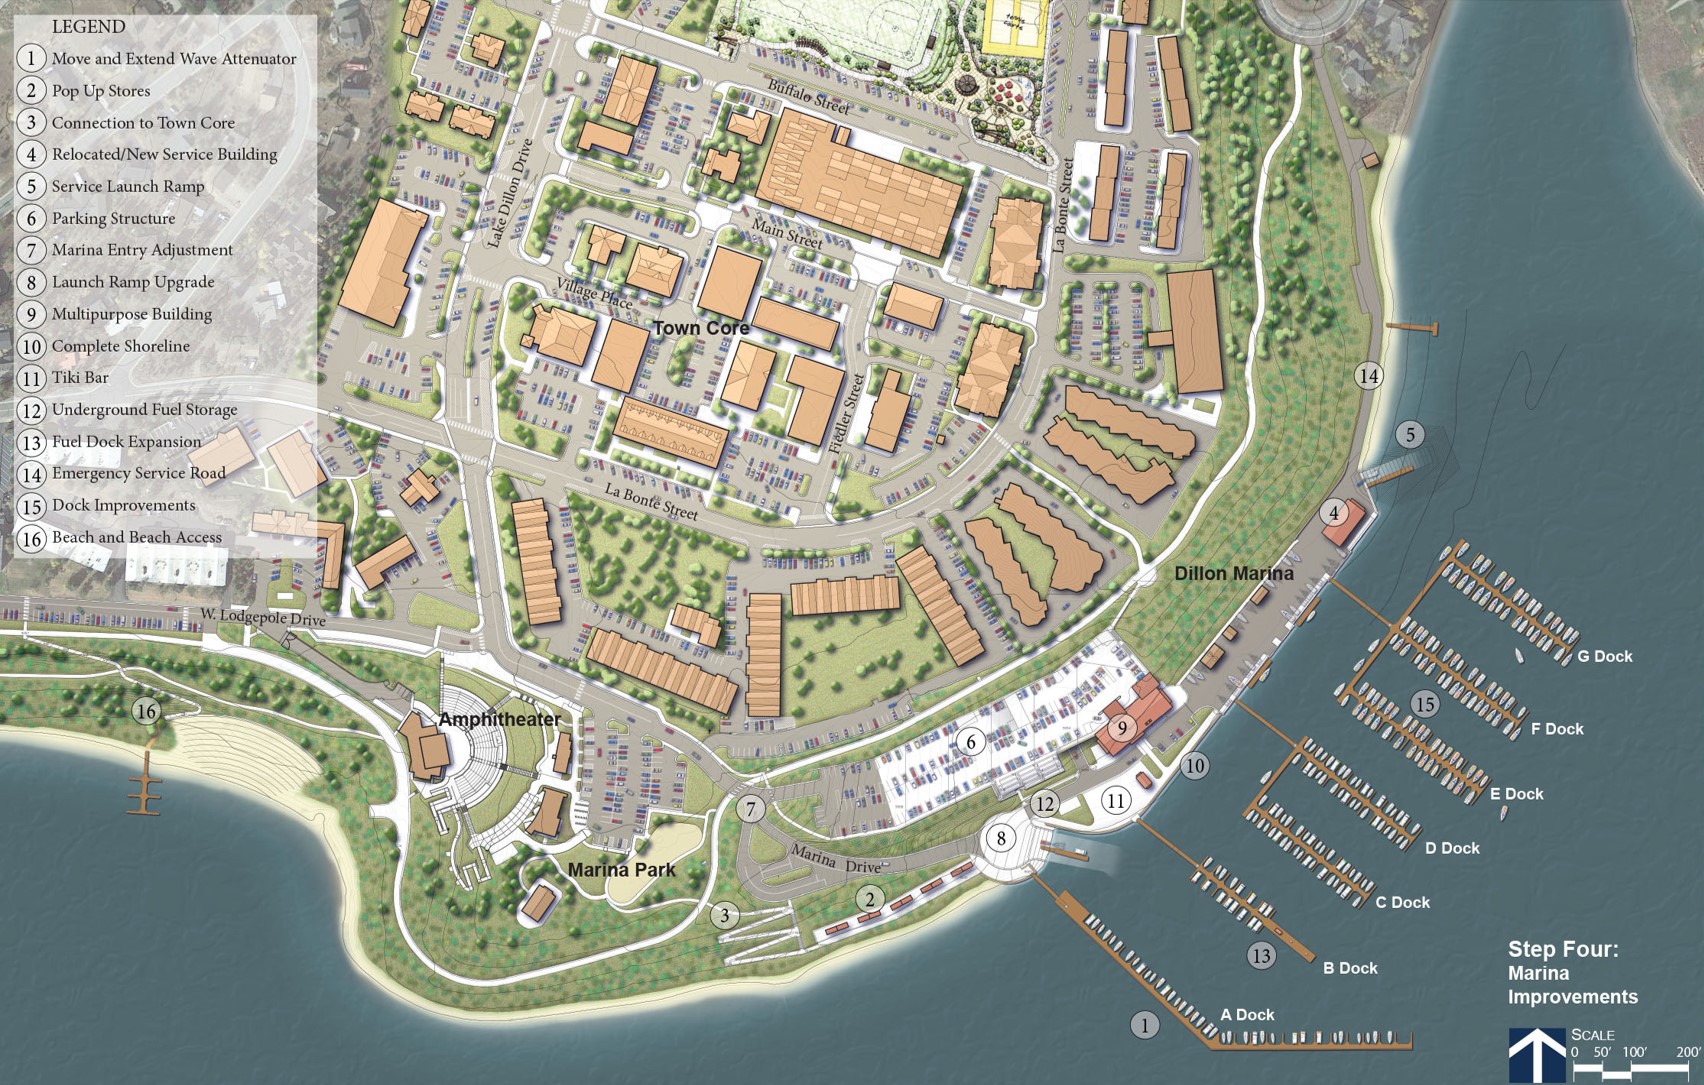 Aerial rendering of a Waterfront Master Plan for Dillon, Colorado